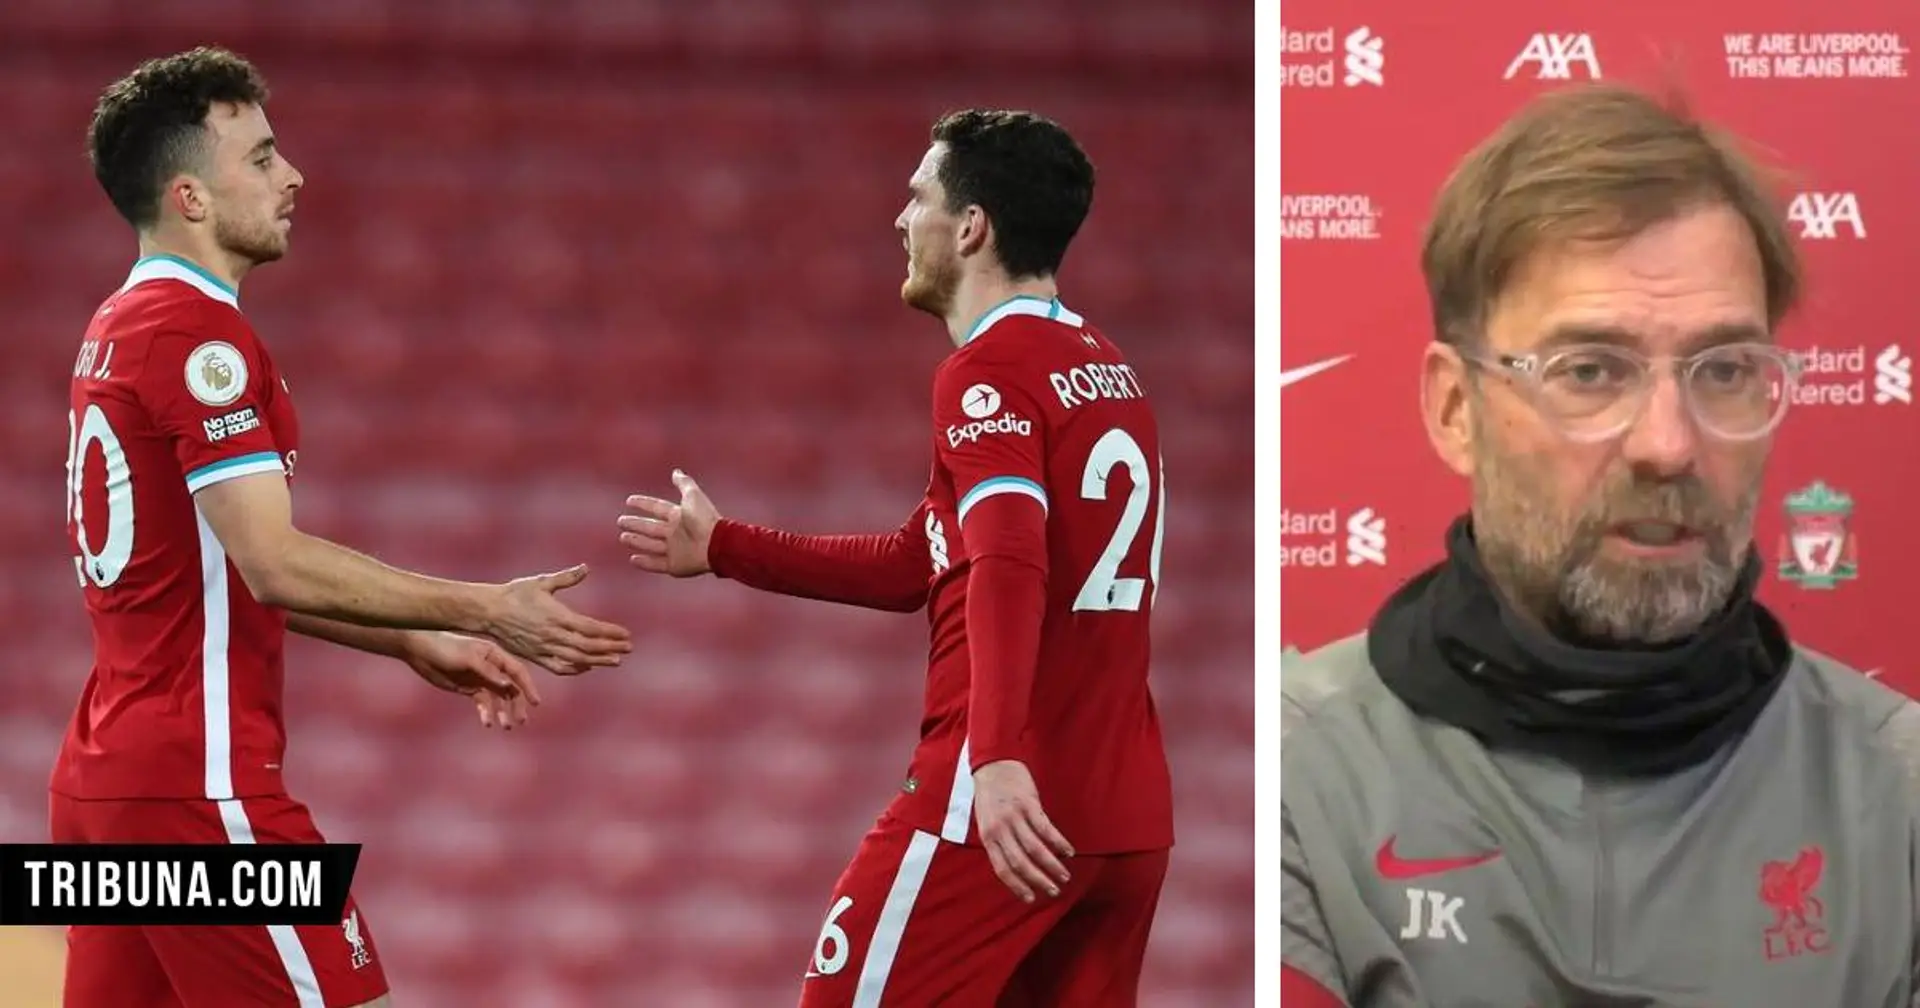 Klopp reveals plan for Robertson and Jota's return to team, explains why preseason training is so important